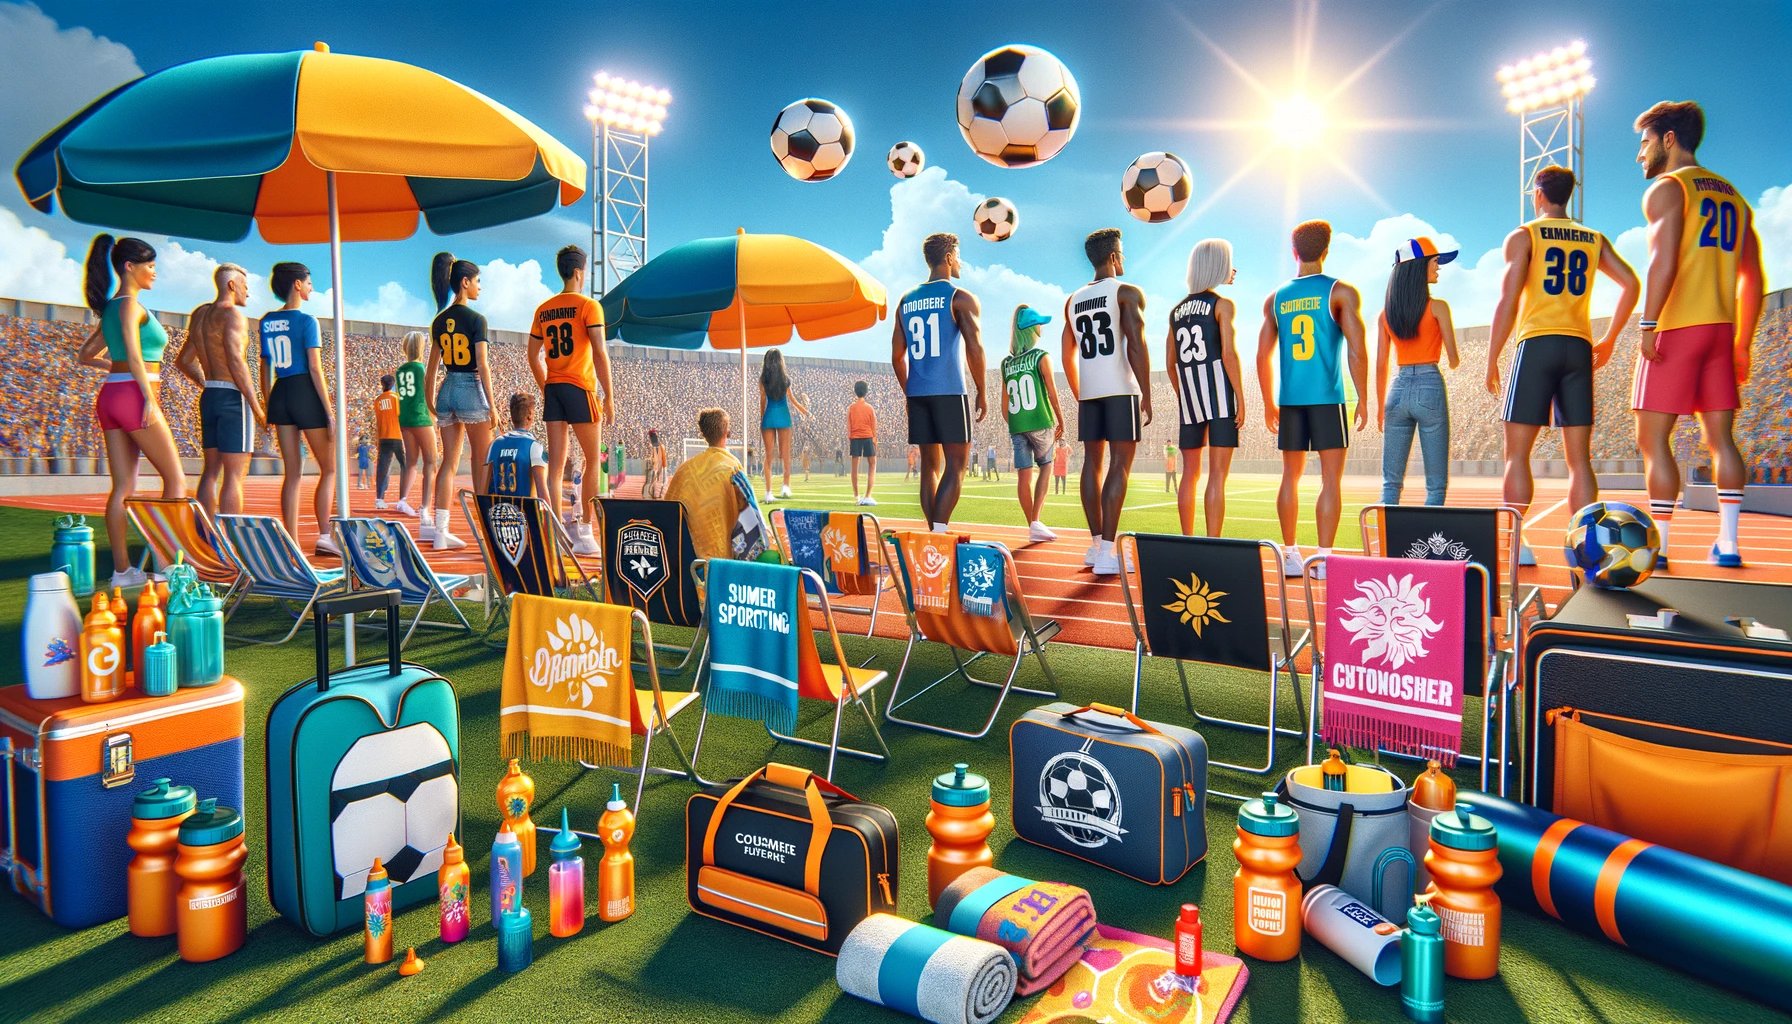 Custom Merchandise Ideas for Summer Sporting Events